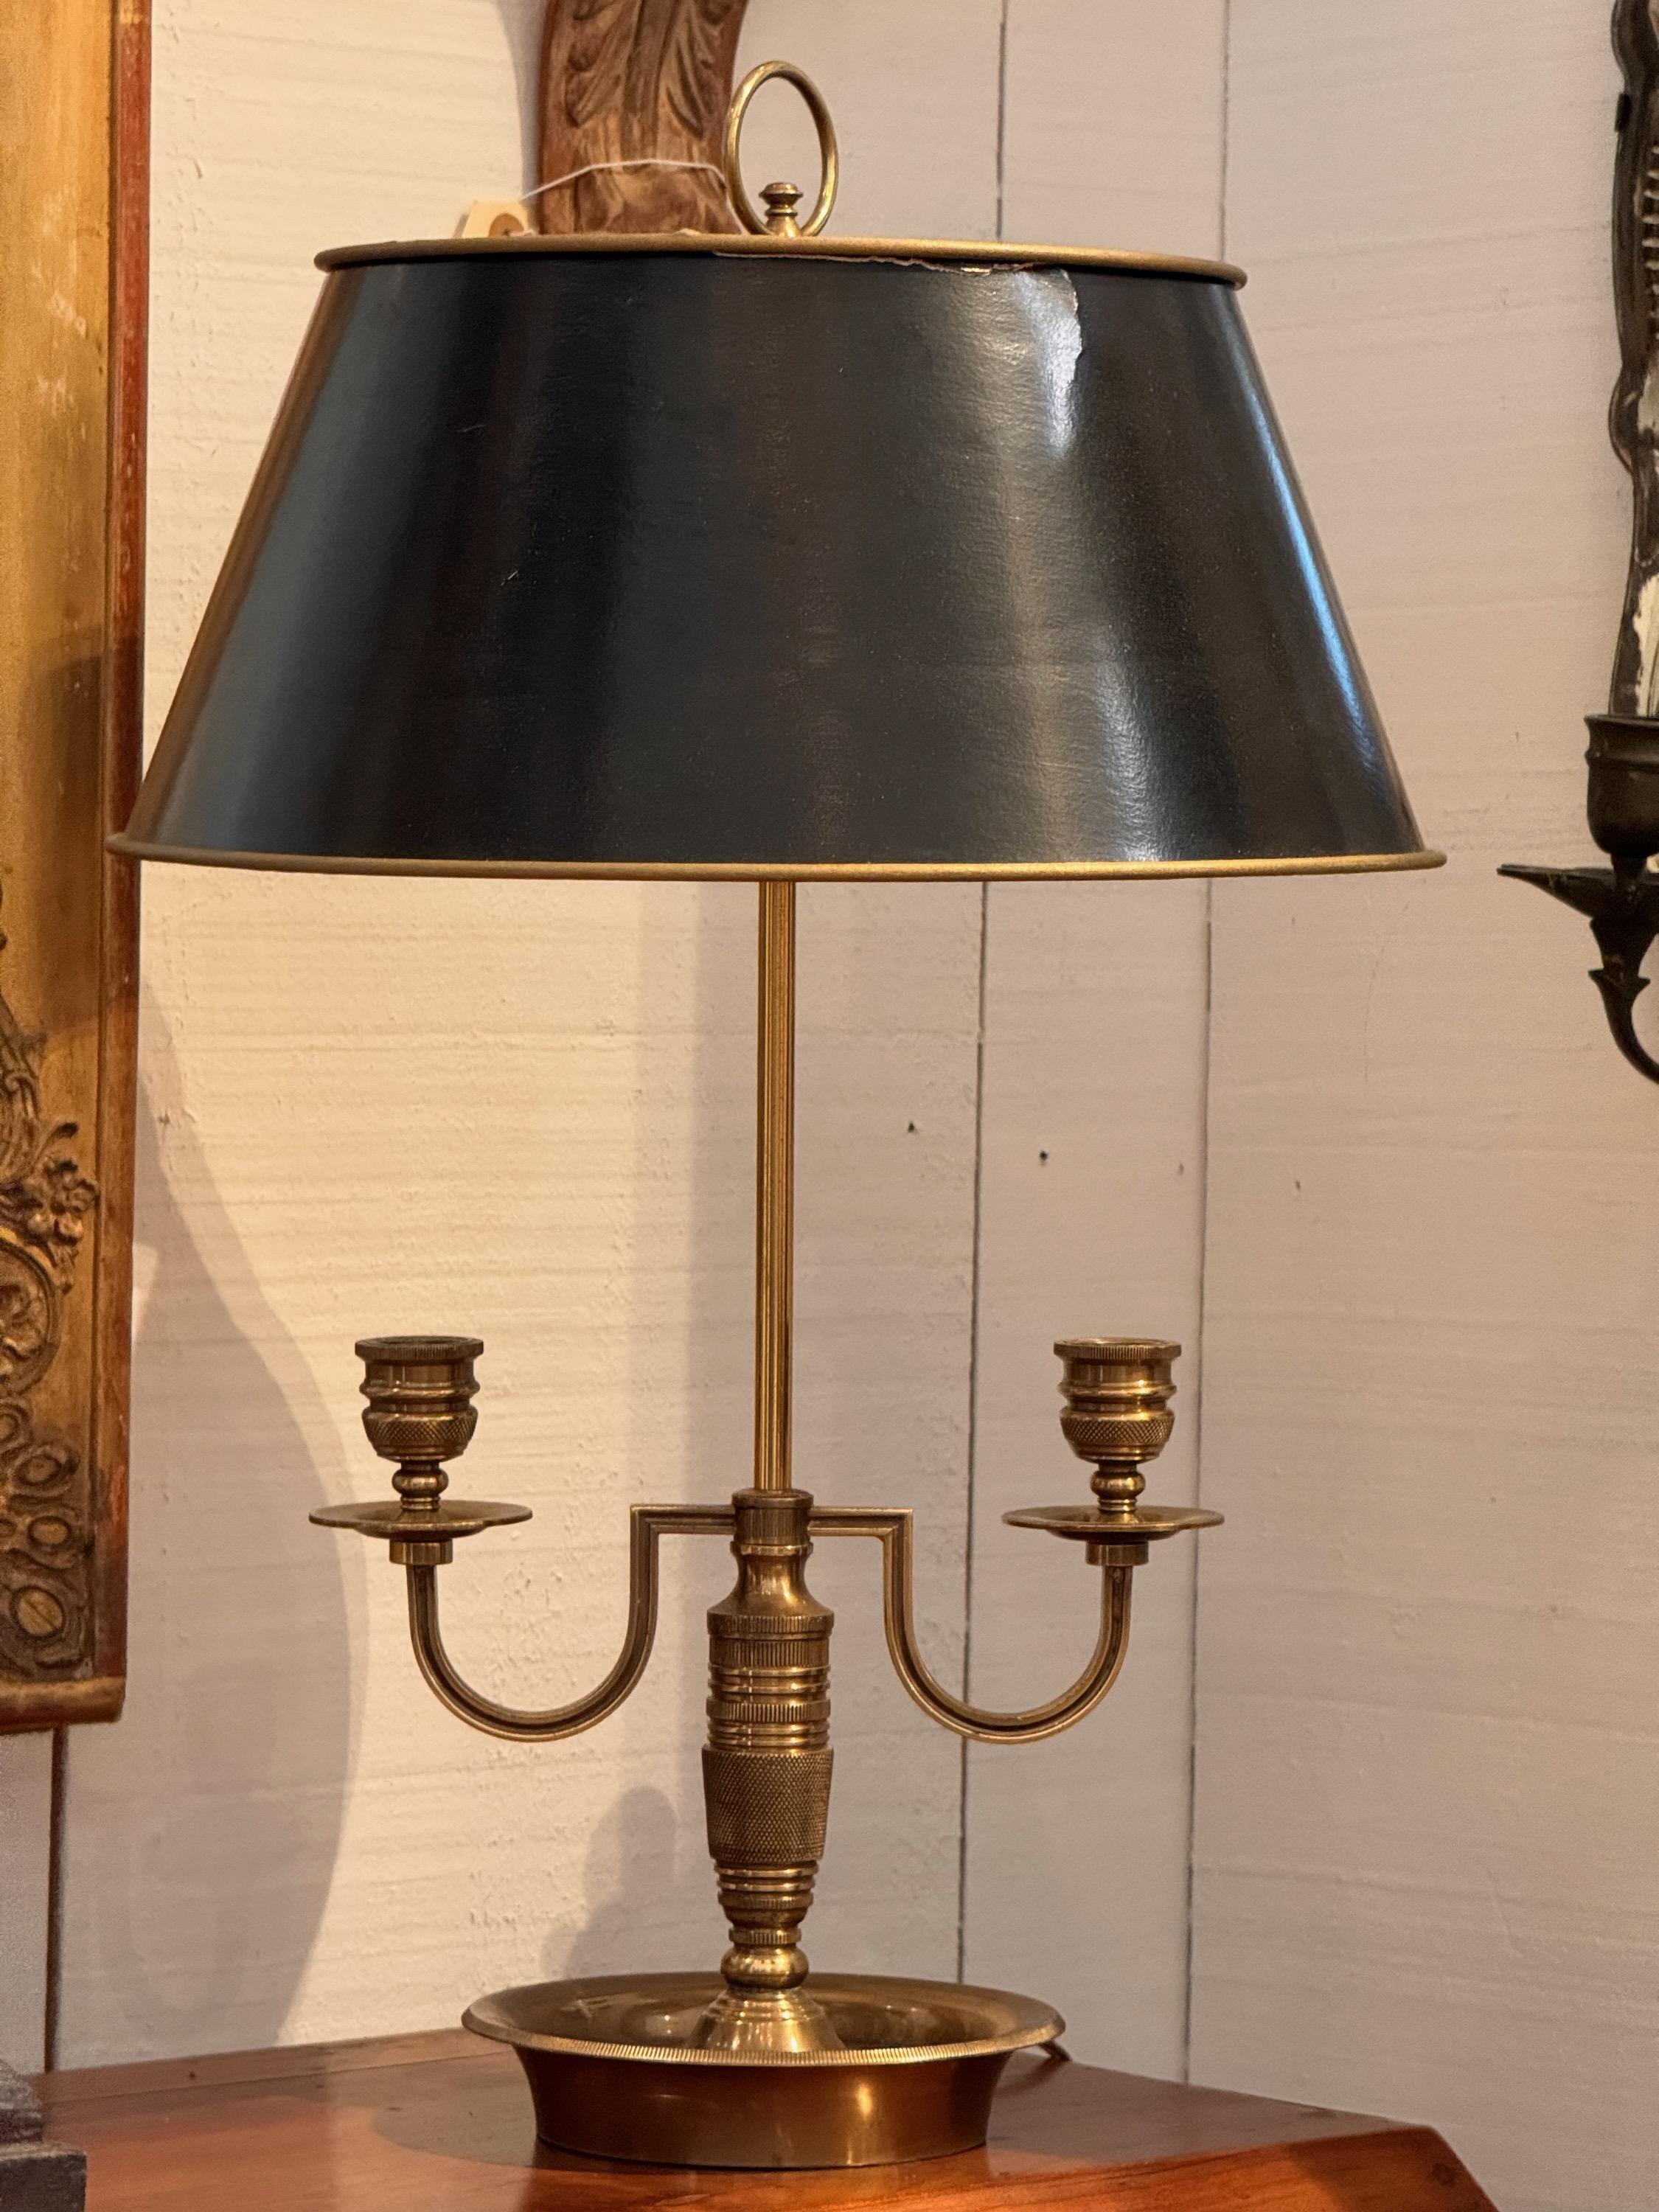 A brass bouillotte lamp with a paper shade. Double arms for candles.